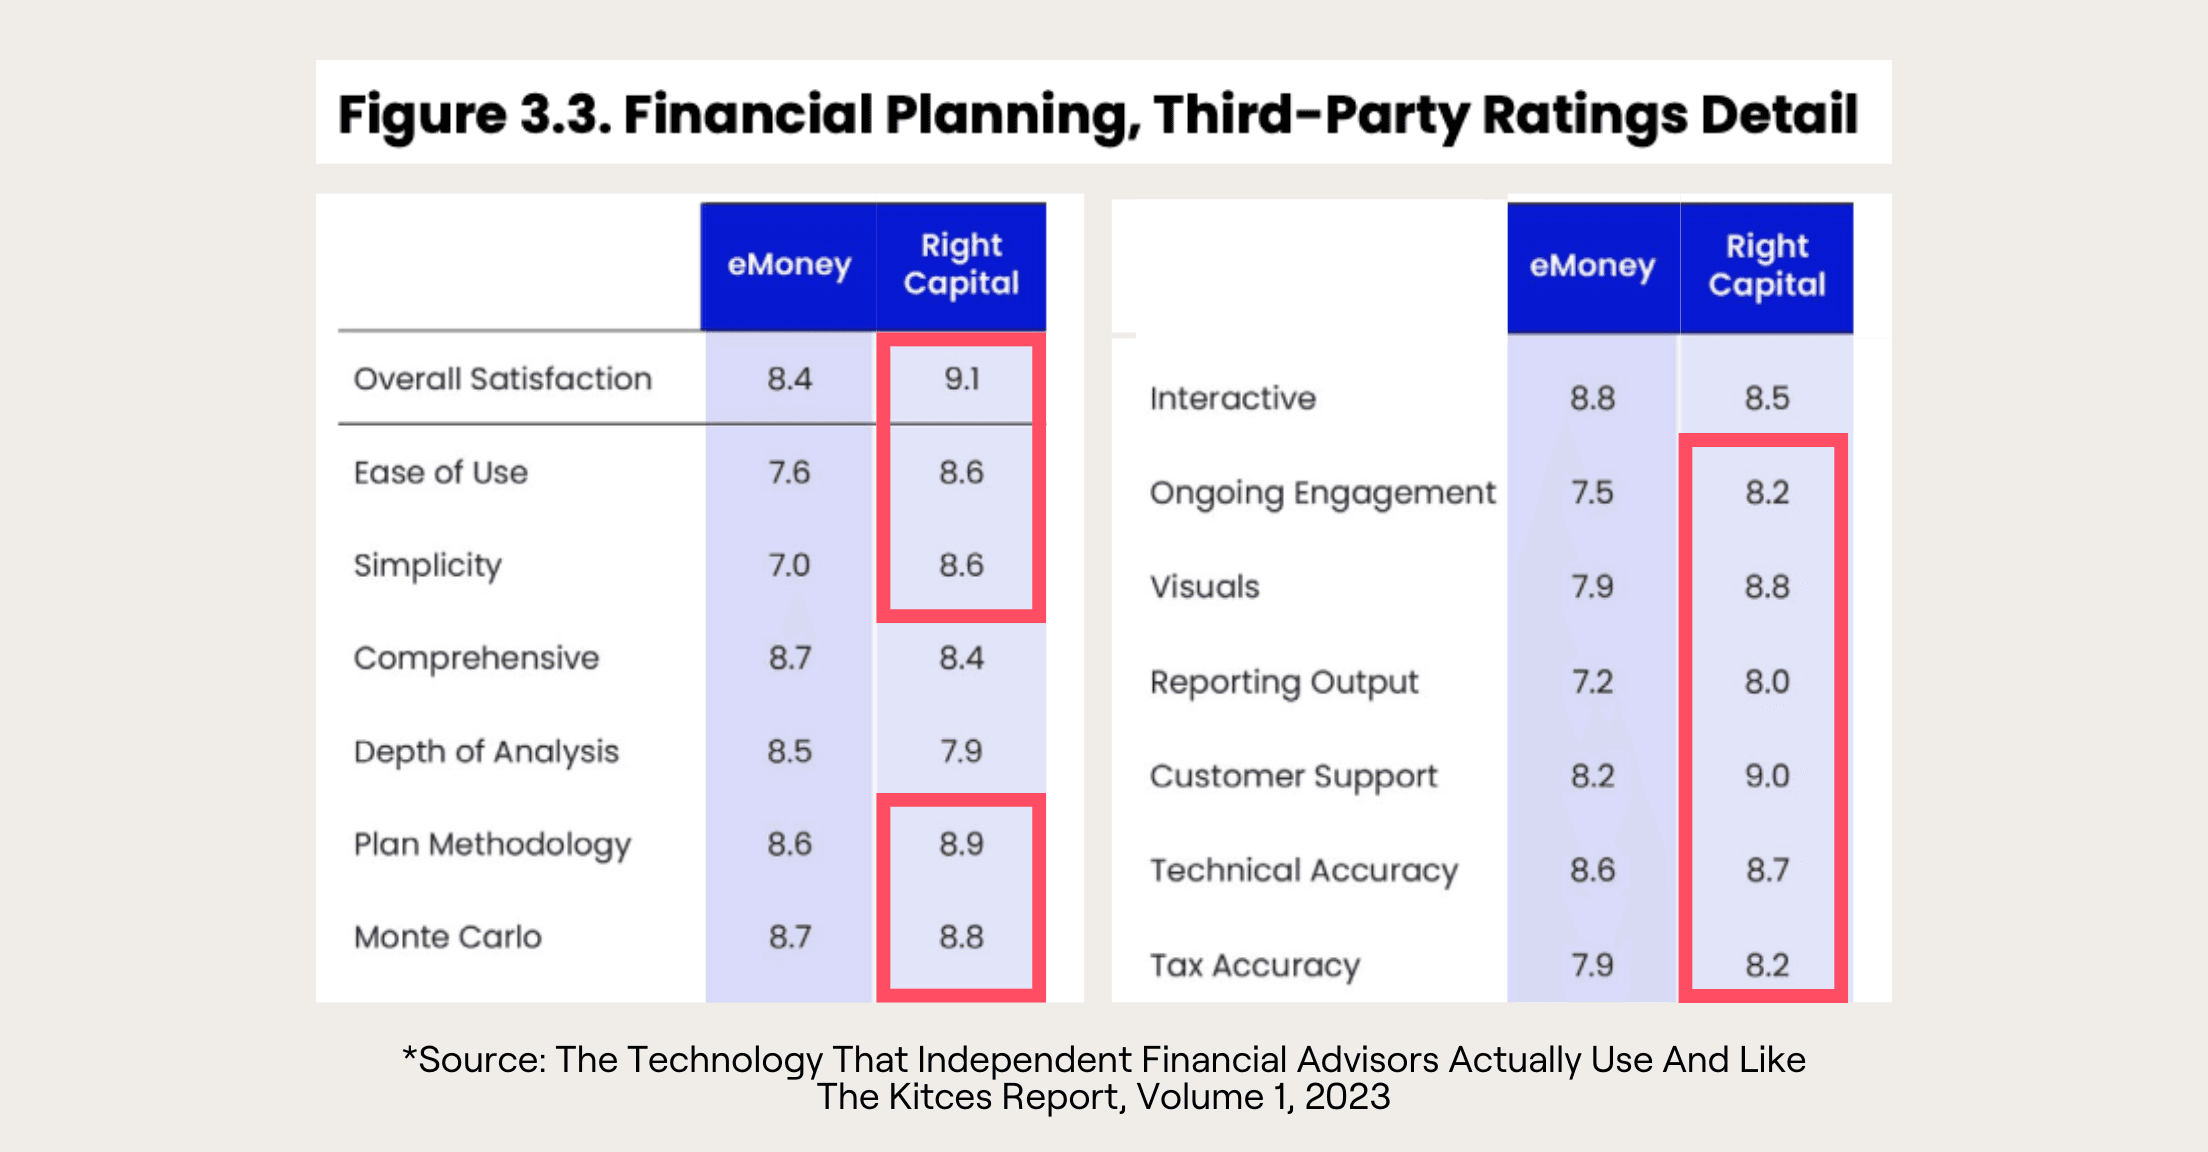 Chart from August 2023 Kitces Report showing RightCapital with higher ratings in the majority of categories than eMoney